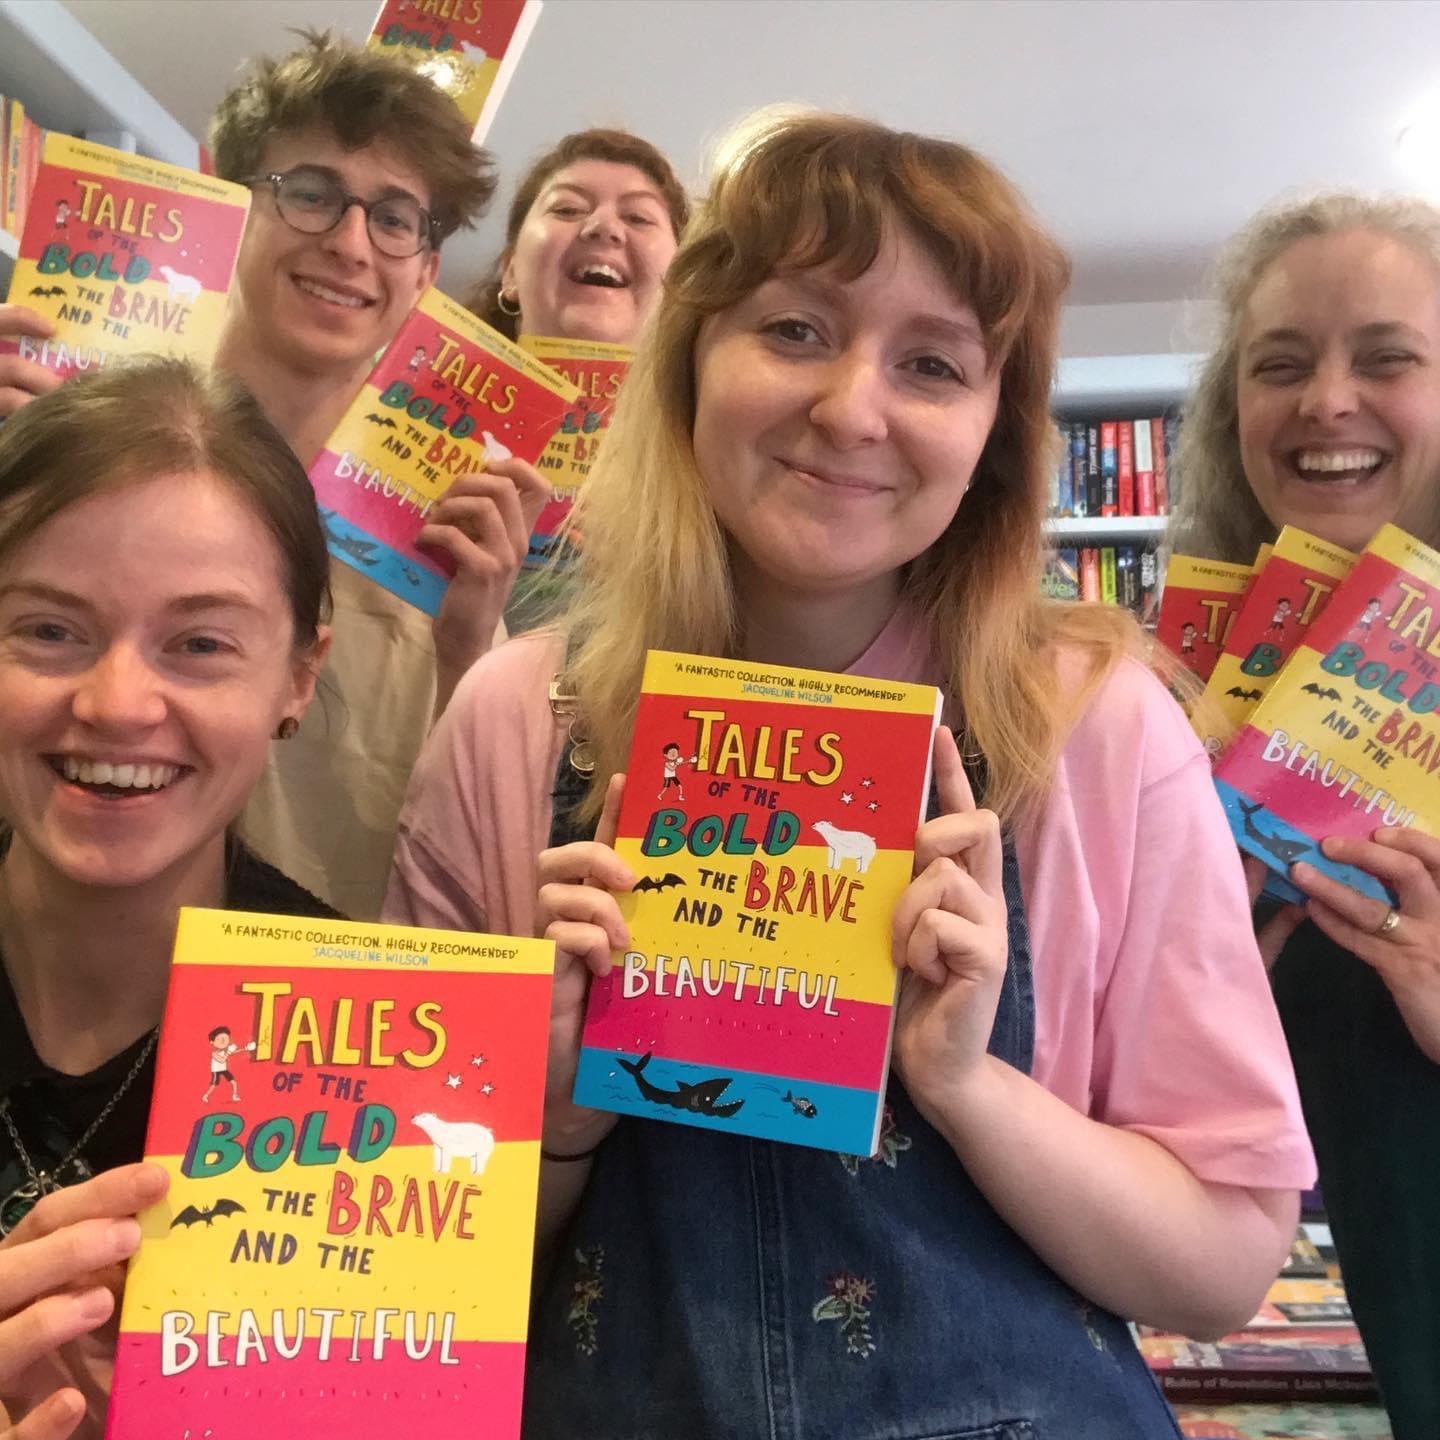 Bookselling team at Booka Bookshop celebrate "Tales of the Bold, the Brave and the Beautiful"